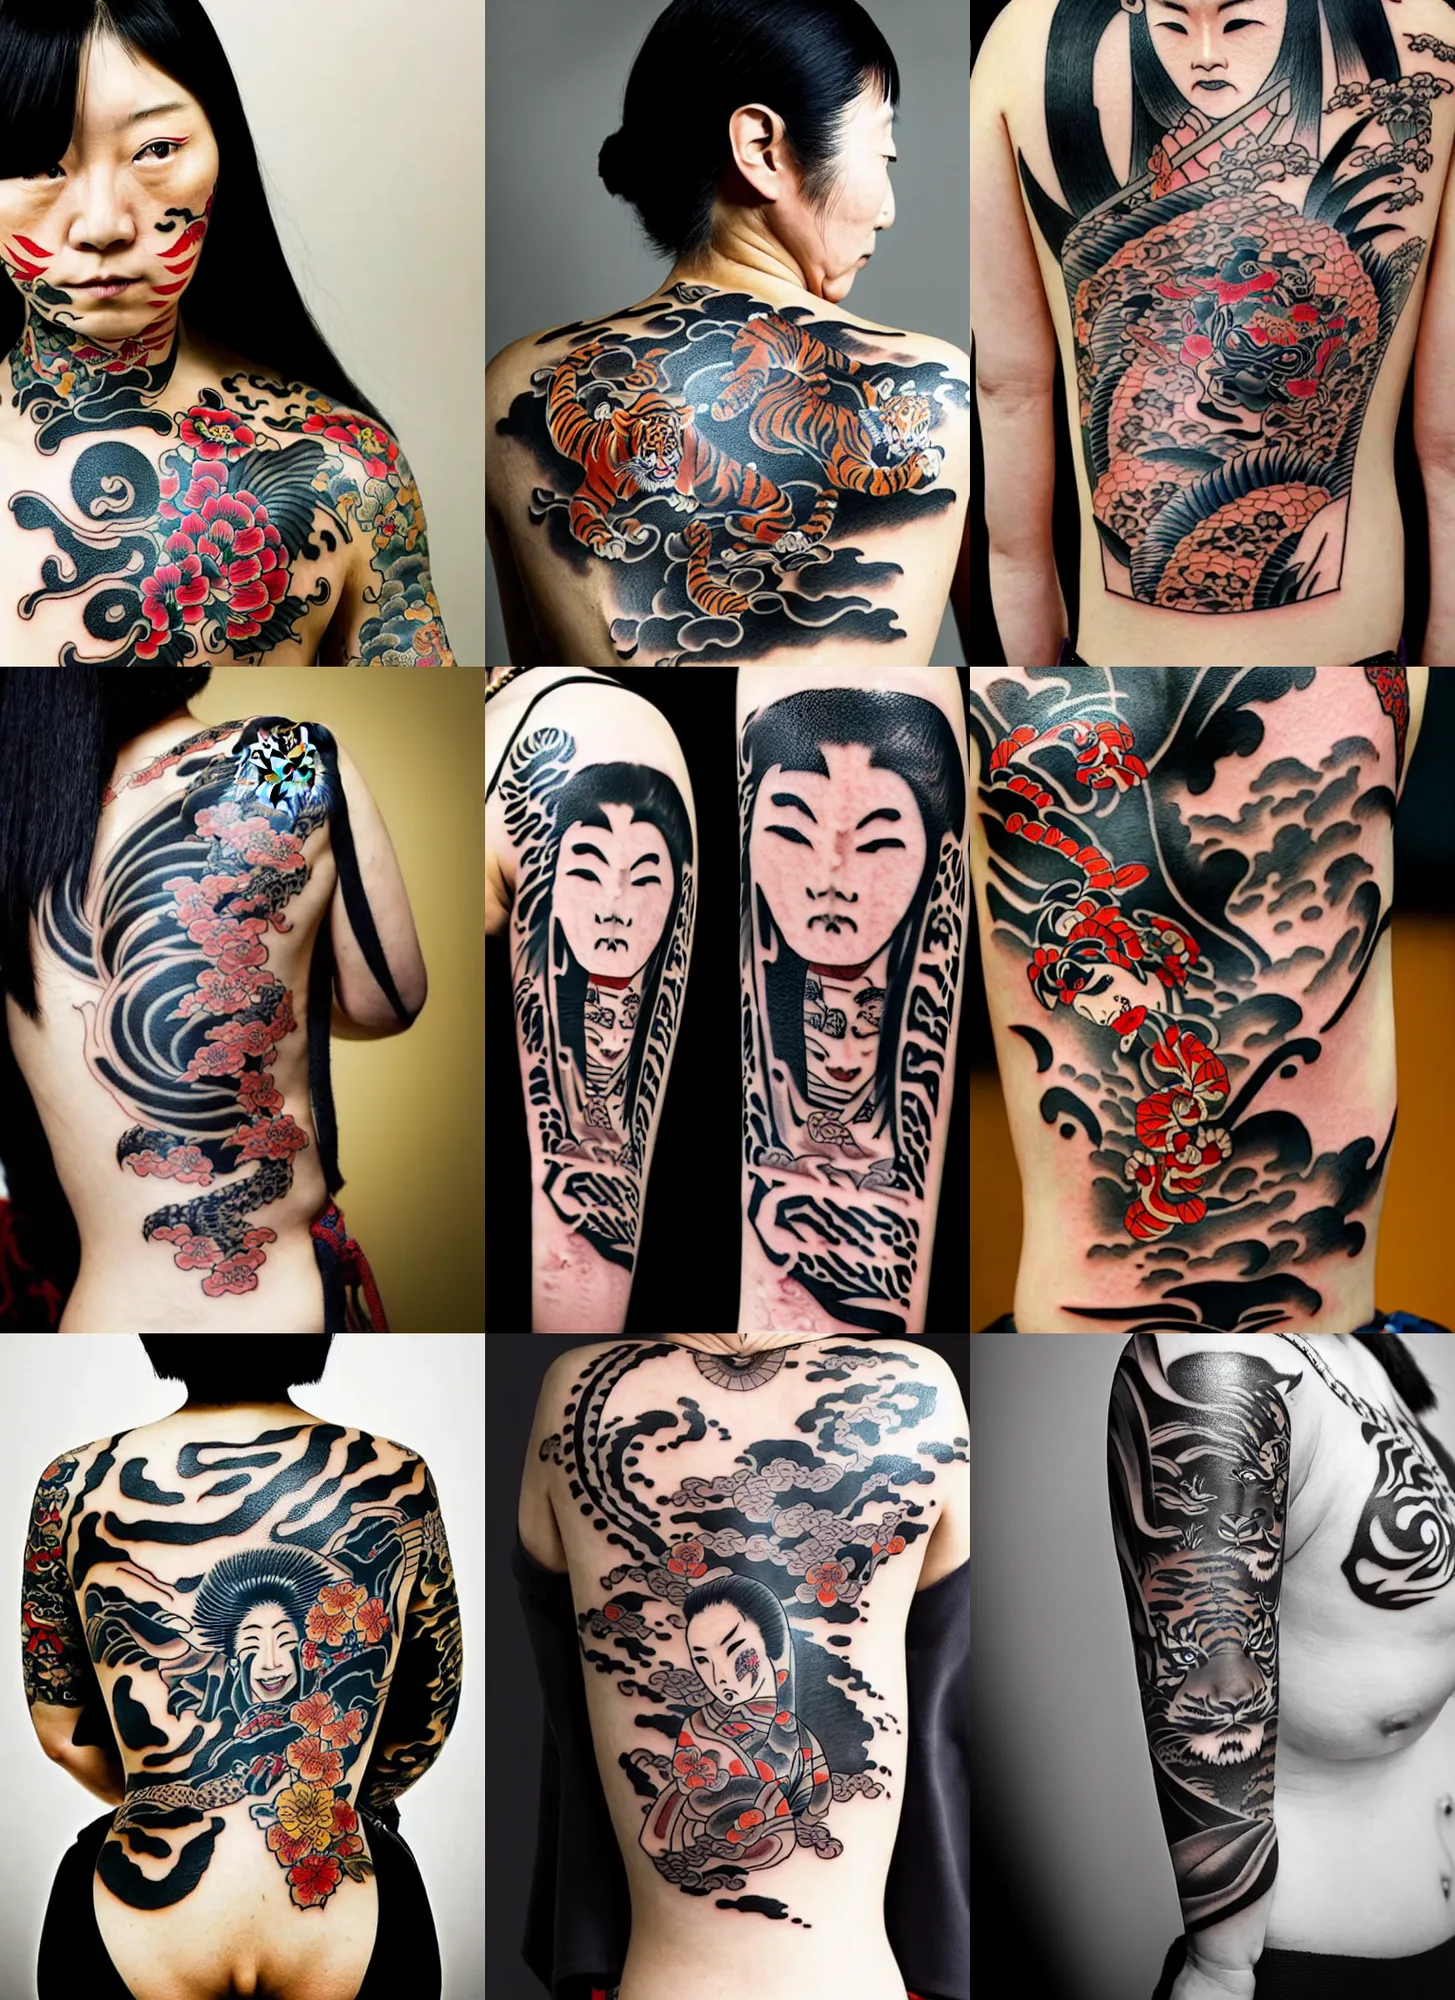 100 Awesome Japanese Tattoo Designs | Art and Design